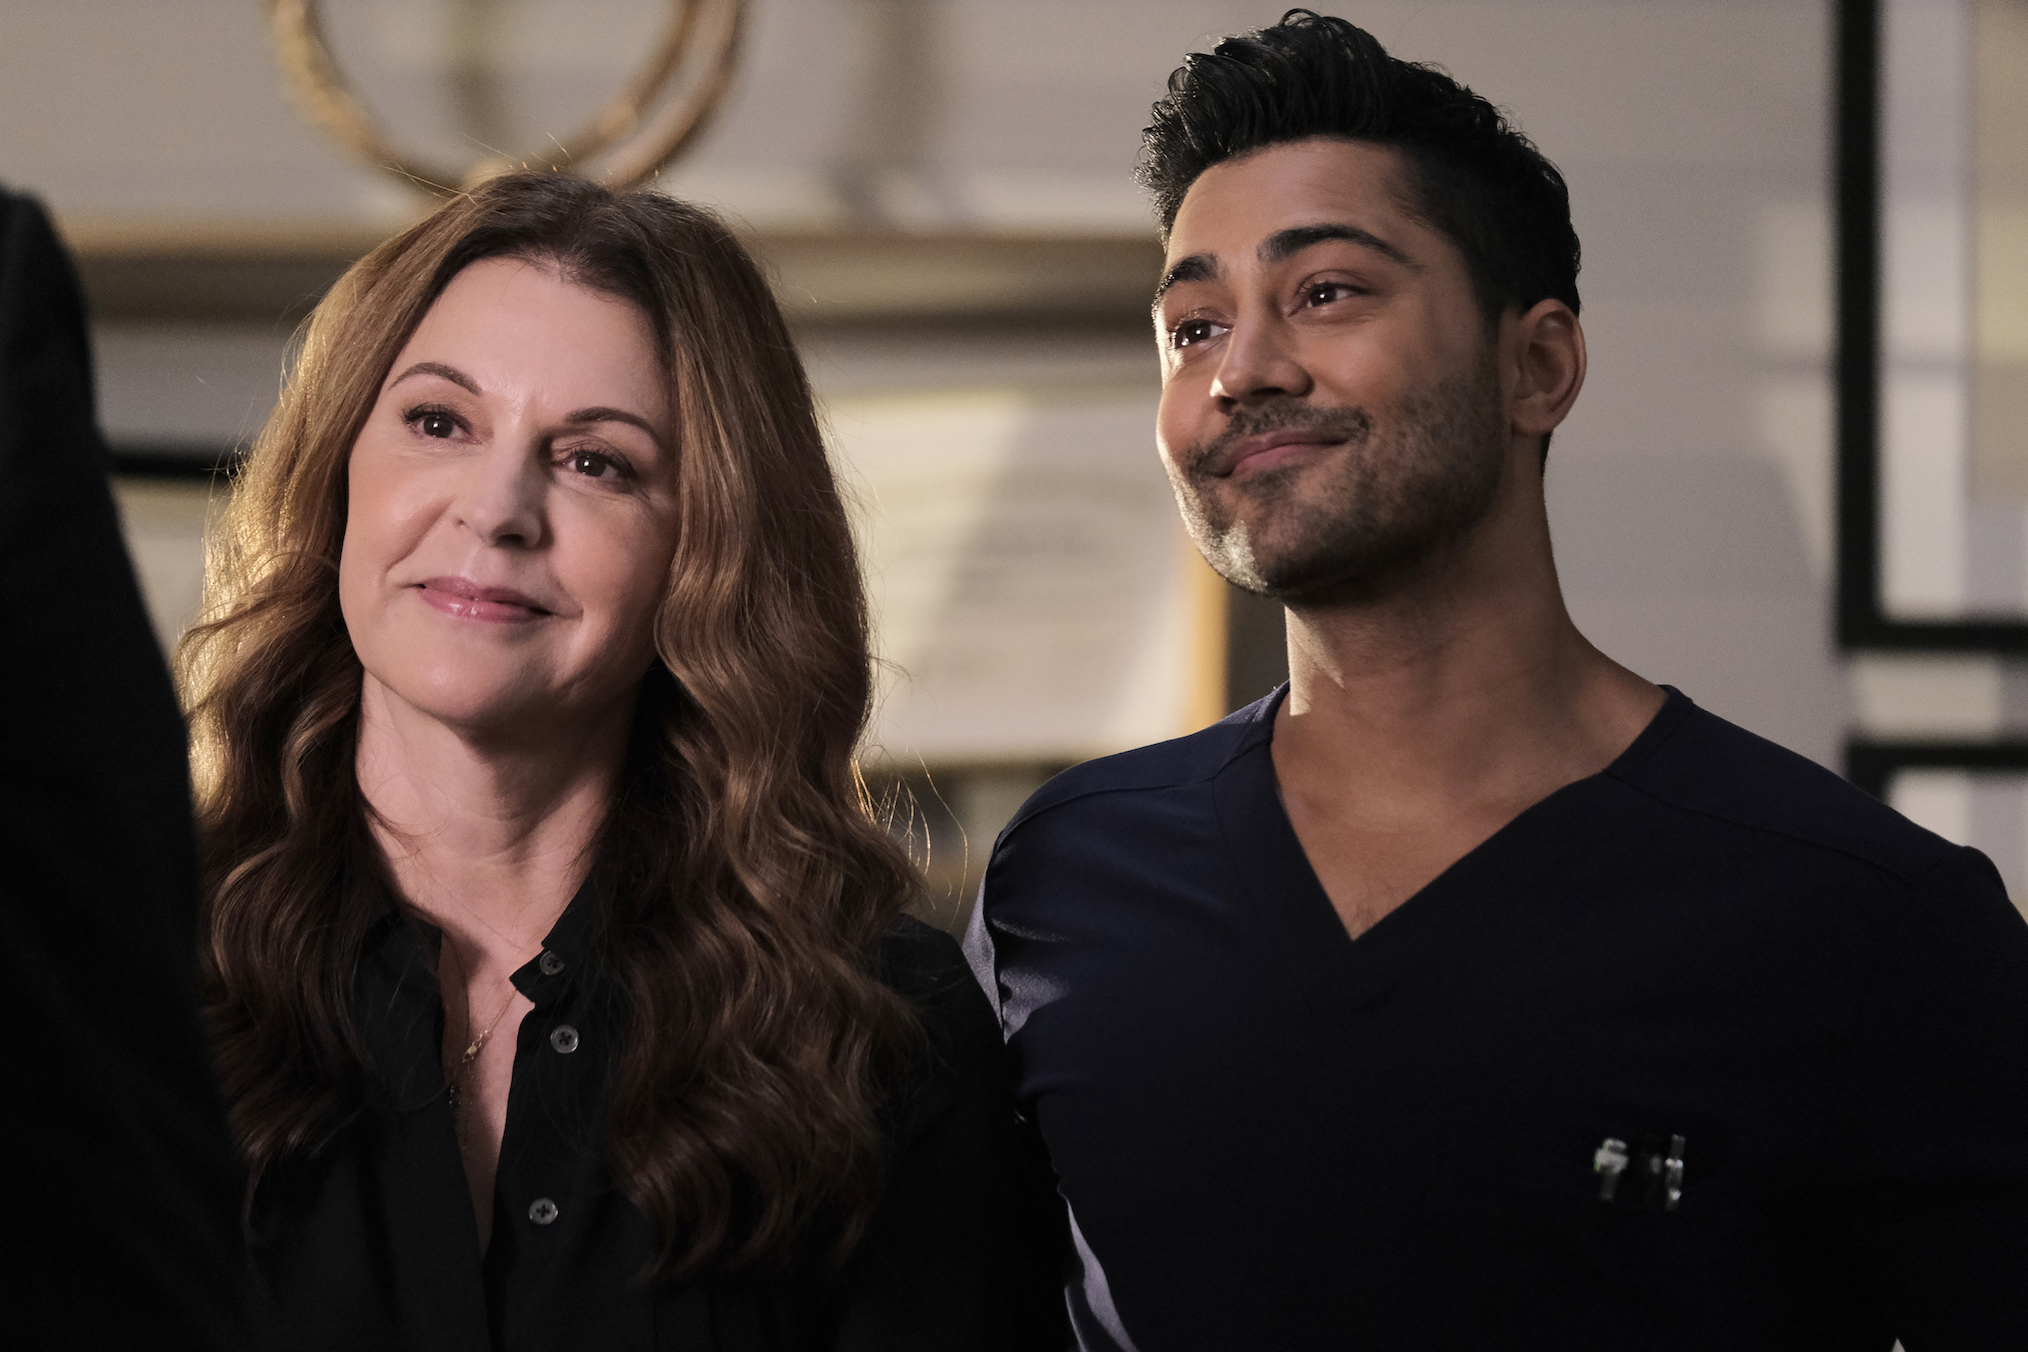 Jane Leeves as Kit, Manish Dayal as Devon in The Resident